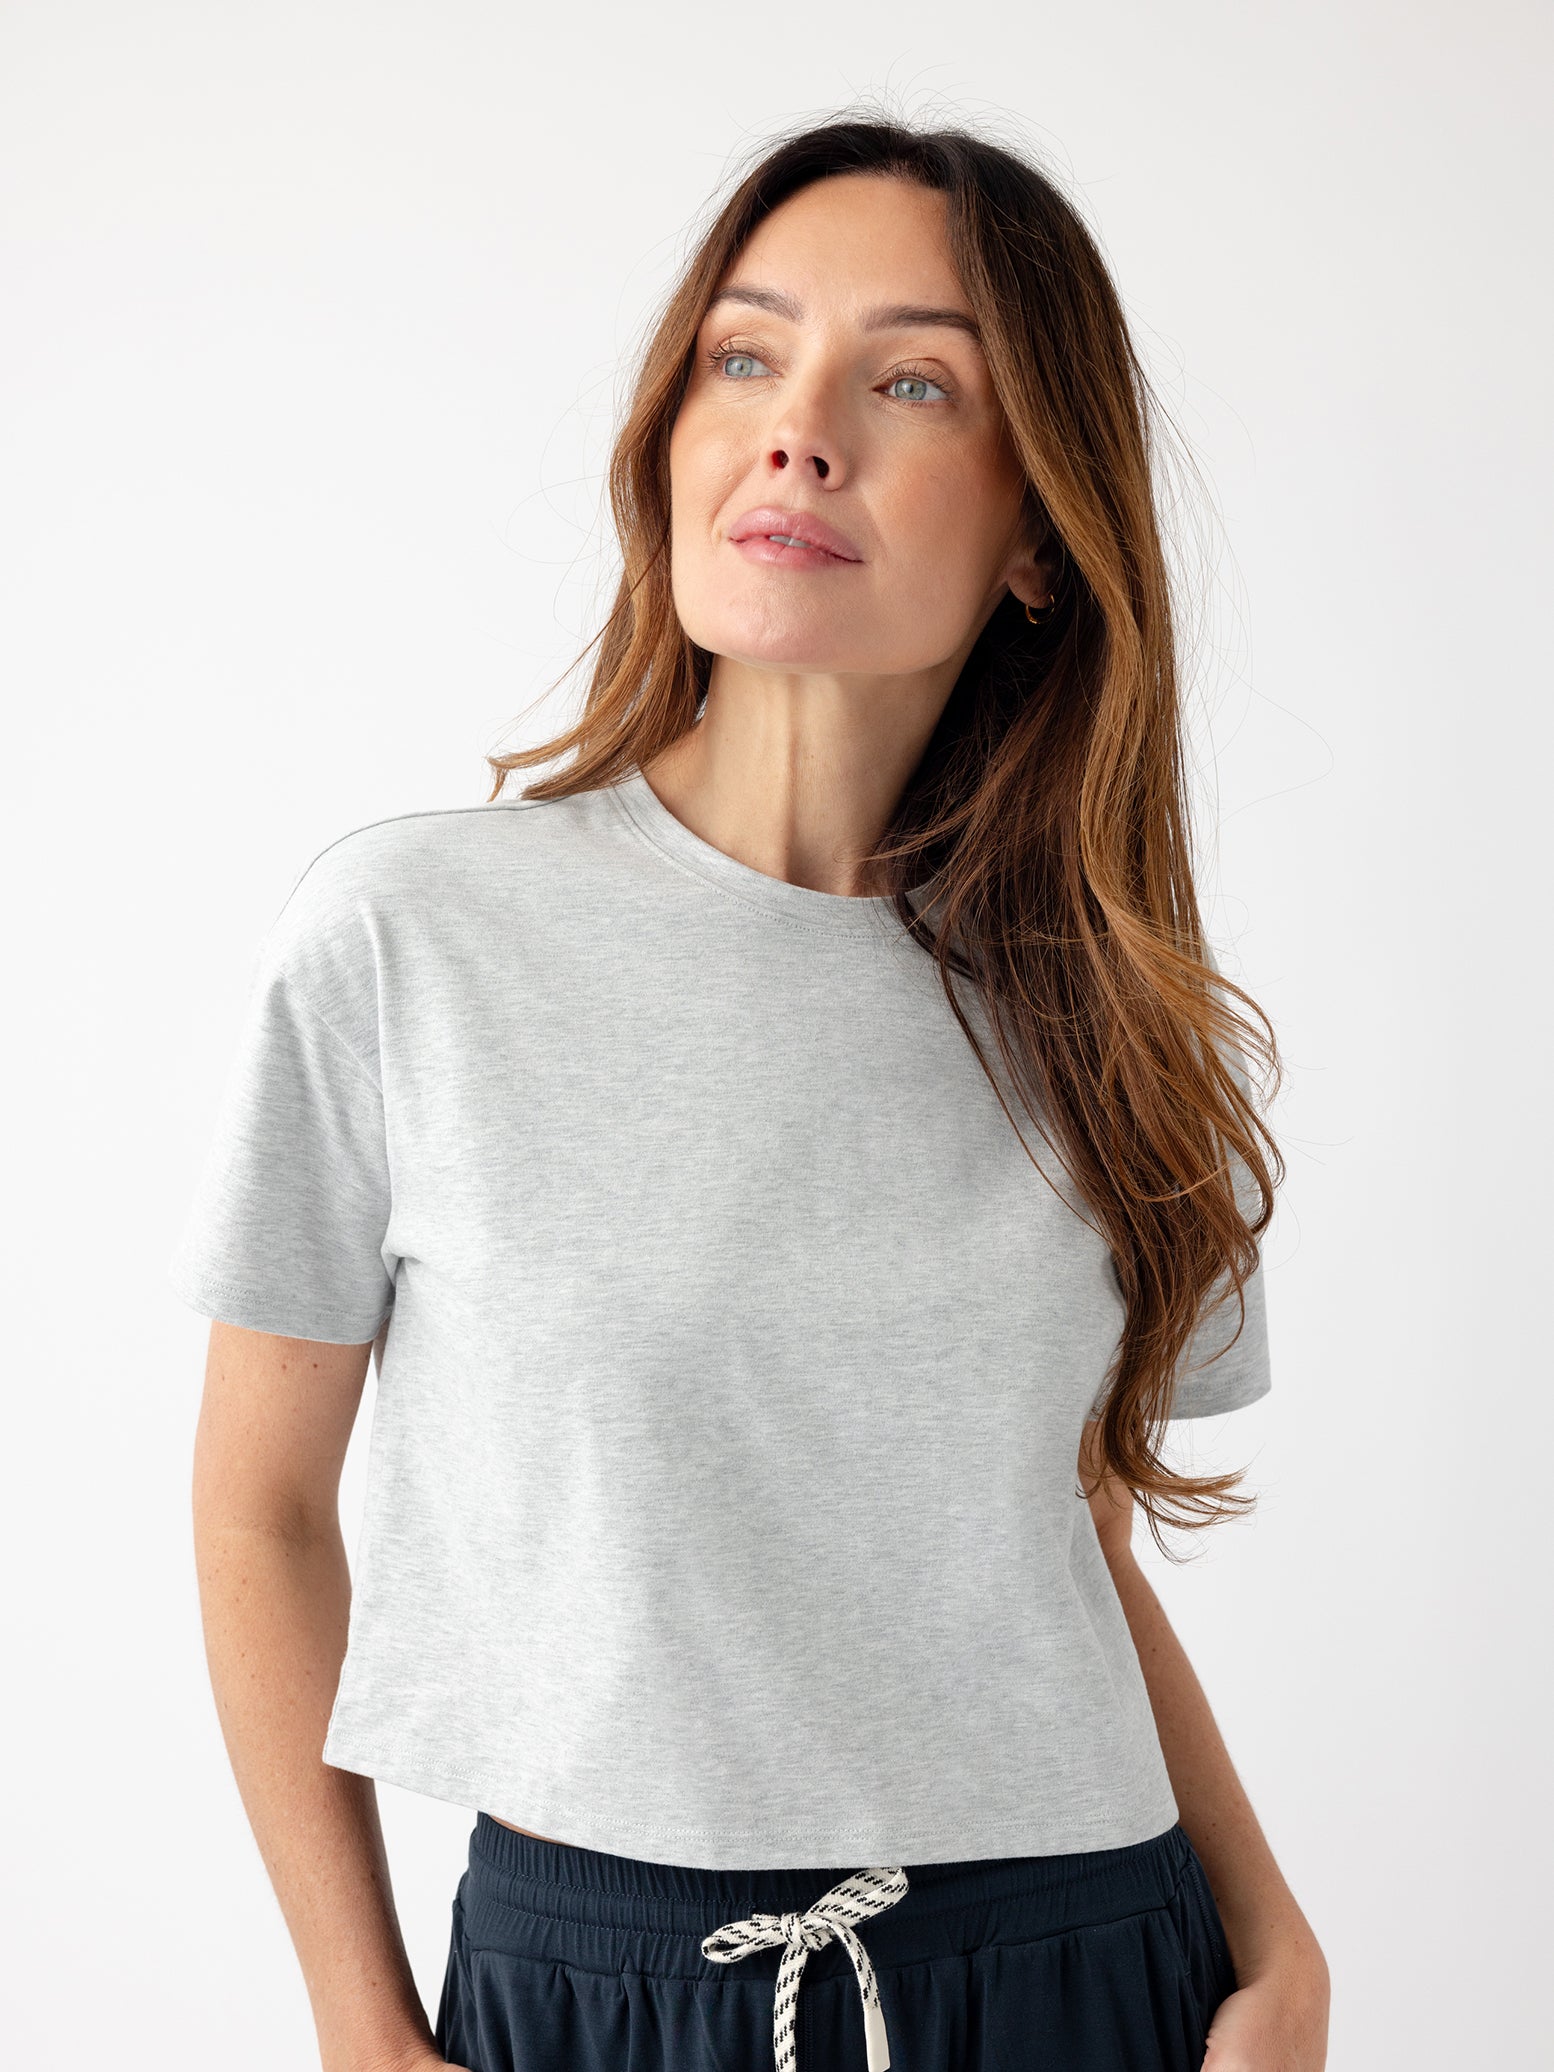 French Dove Heather All Day Cropped Tee. The photo of the All Day Cropped Tee is taken with a with a white background and is worn by a woman. 